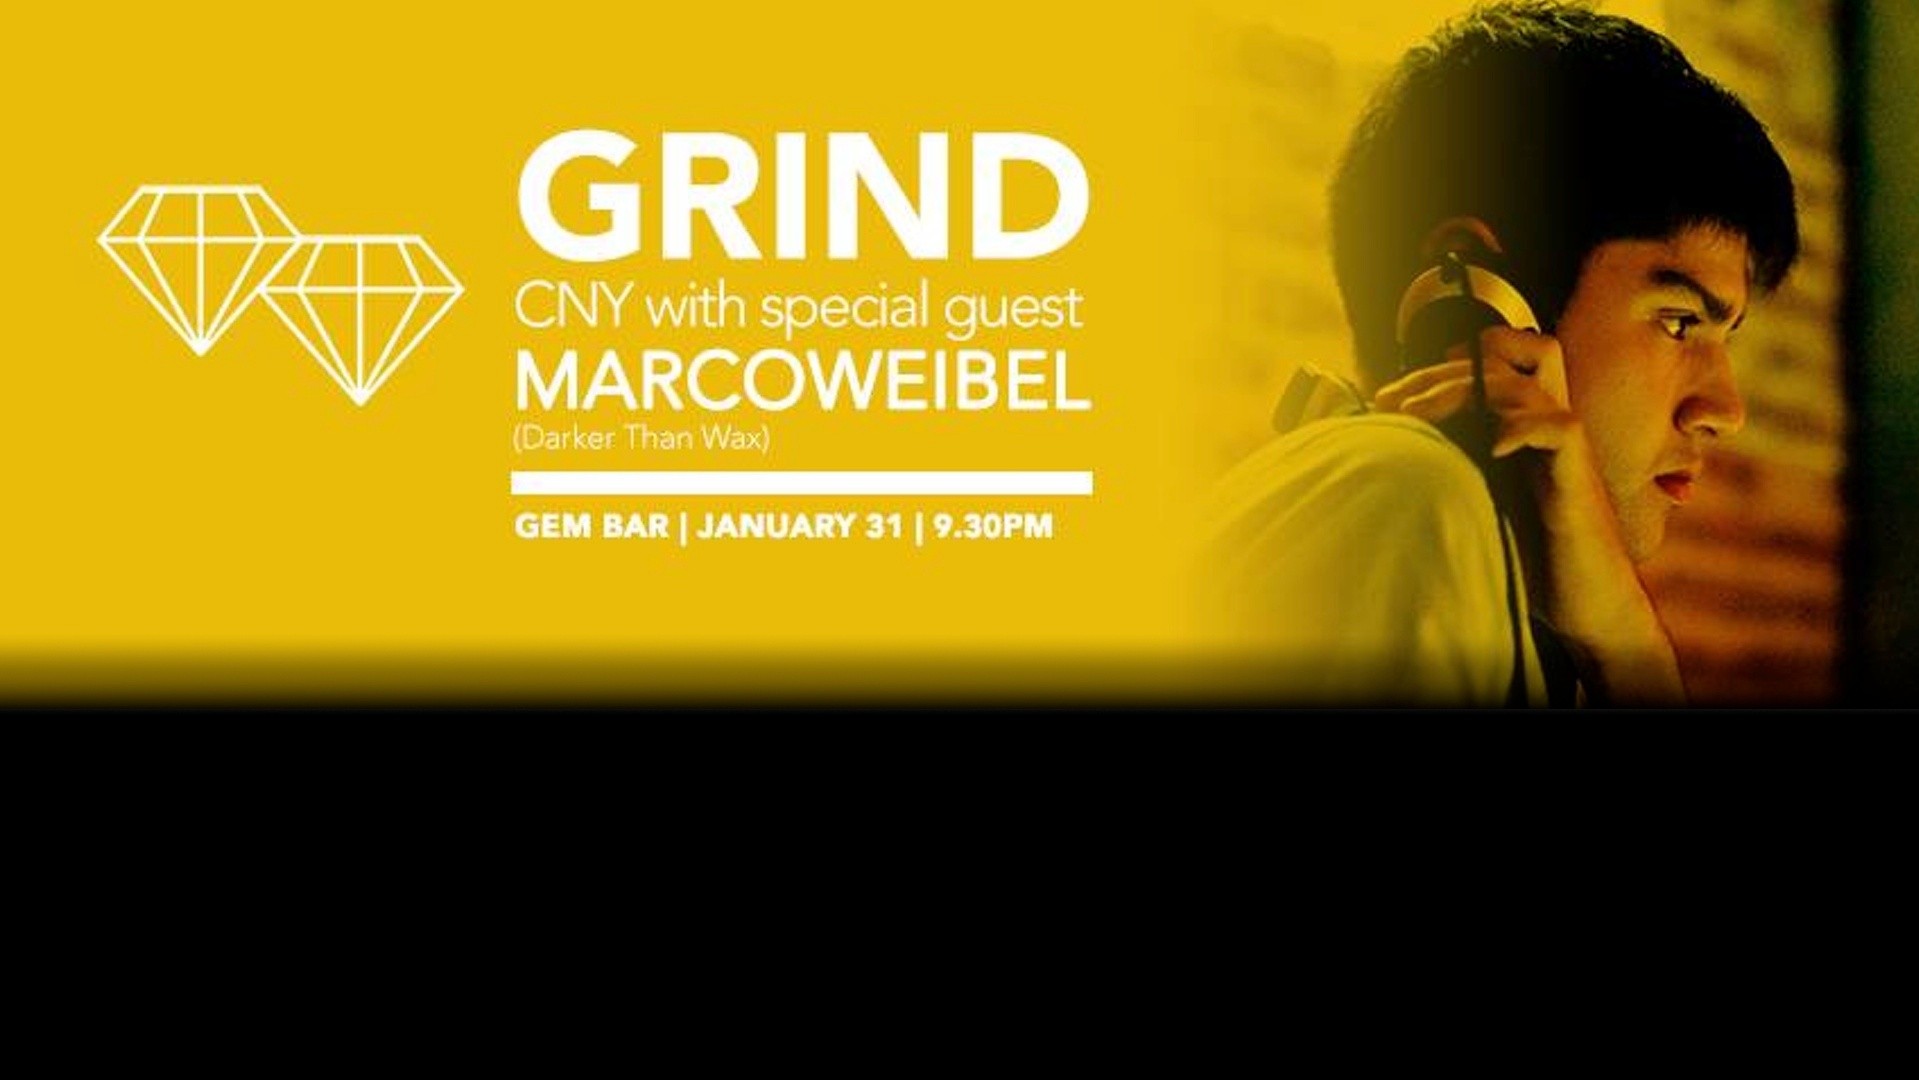 GRIND with special guest Marcoweibel